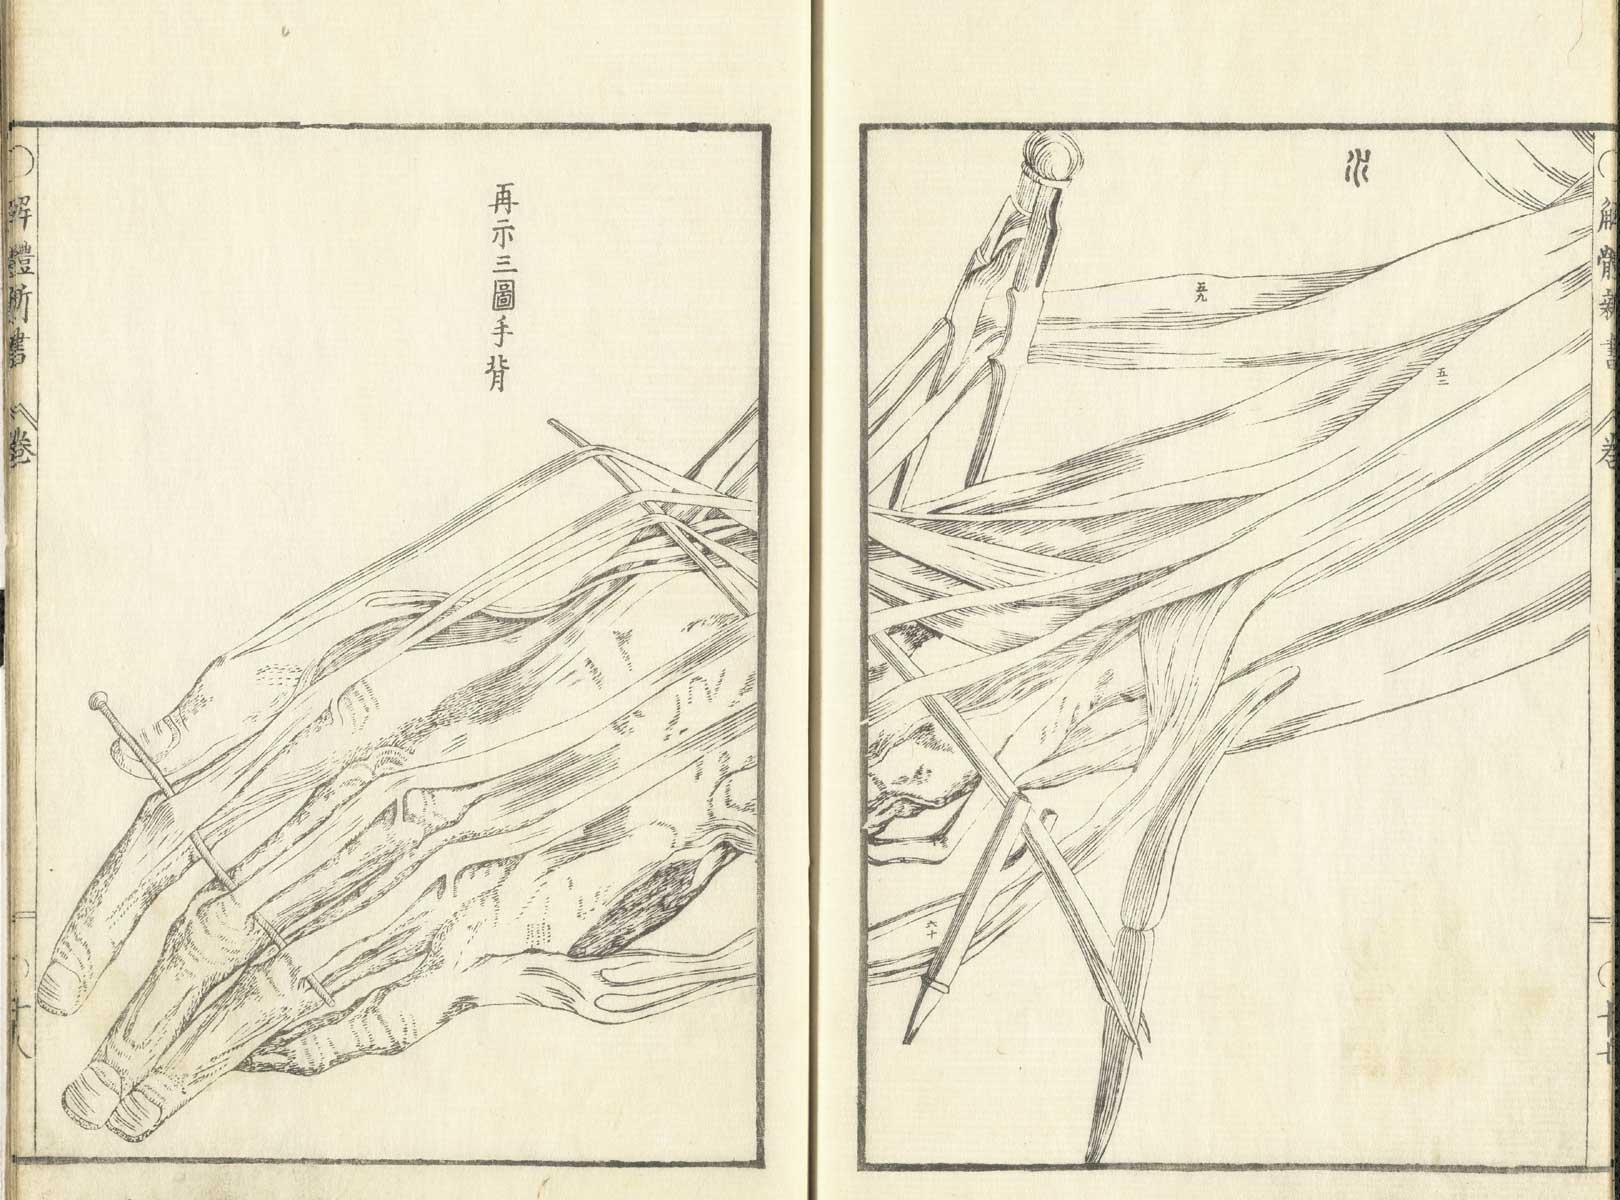 Pages 17 and 18 of Johann Adam Kulmus' Kaitai shinsho, featuring the muscles and tendons of a flayed left hand illustrated across both pages.